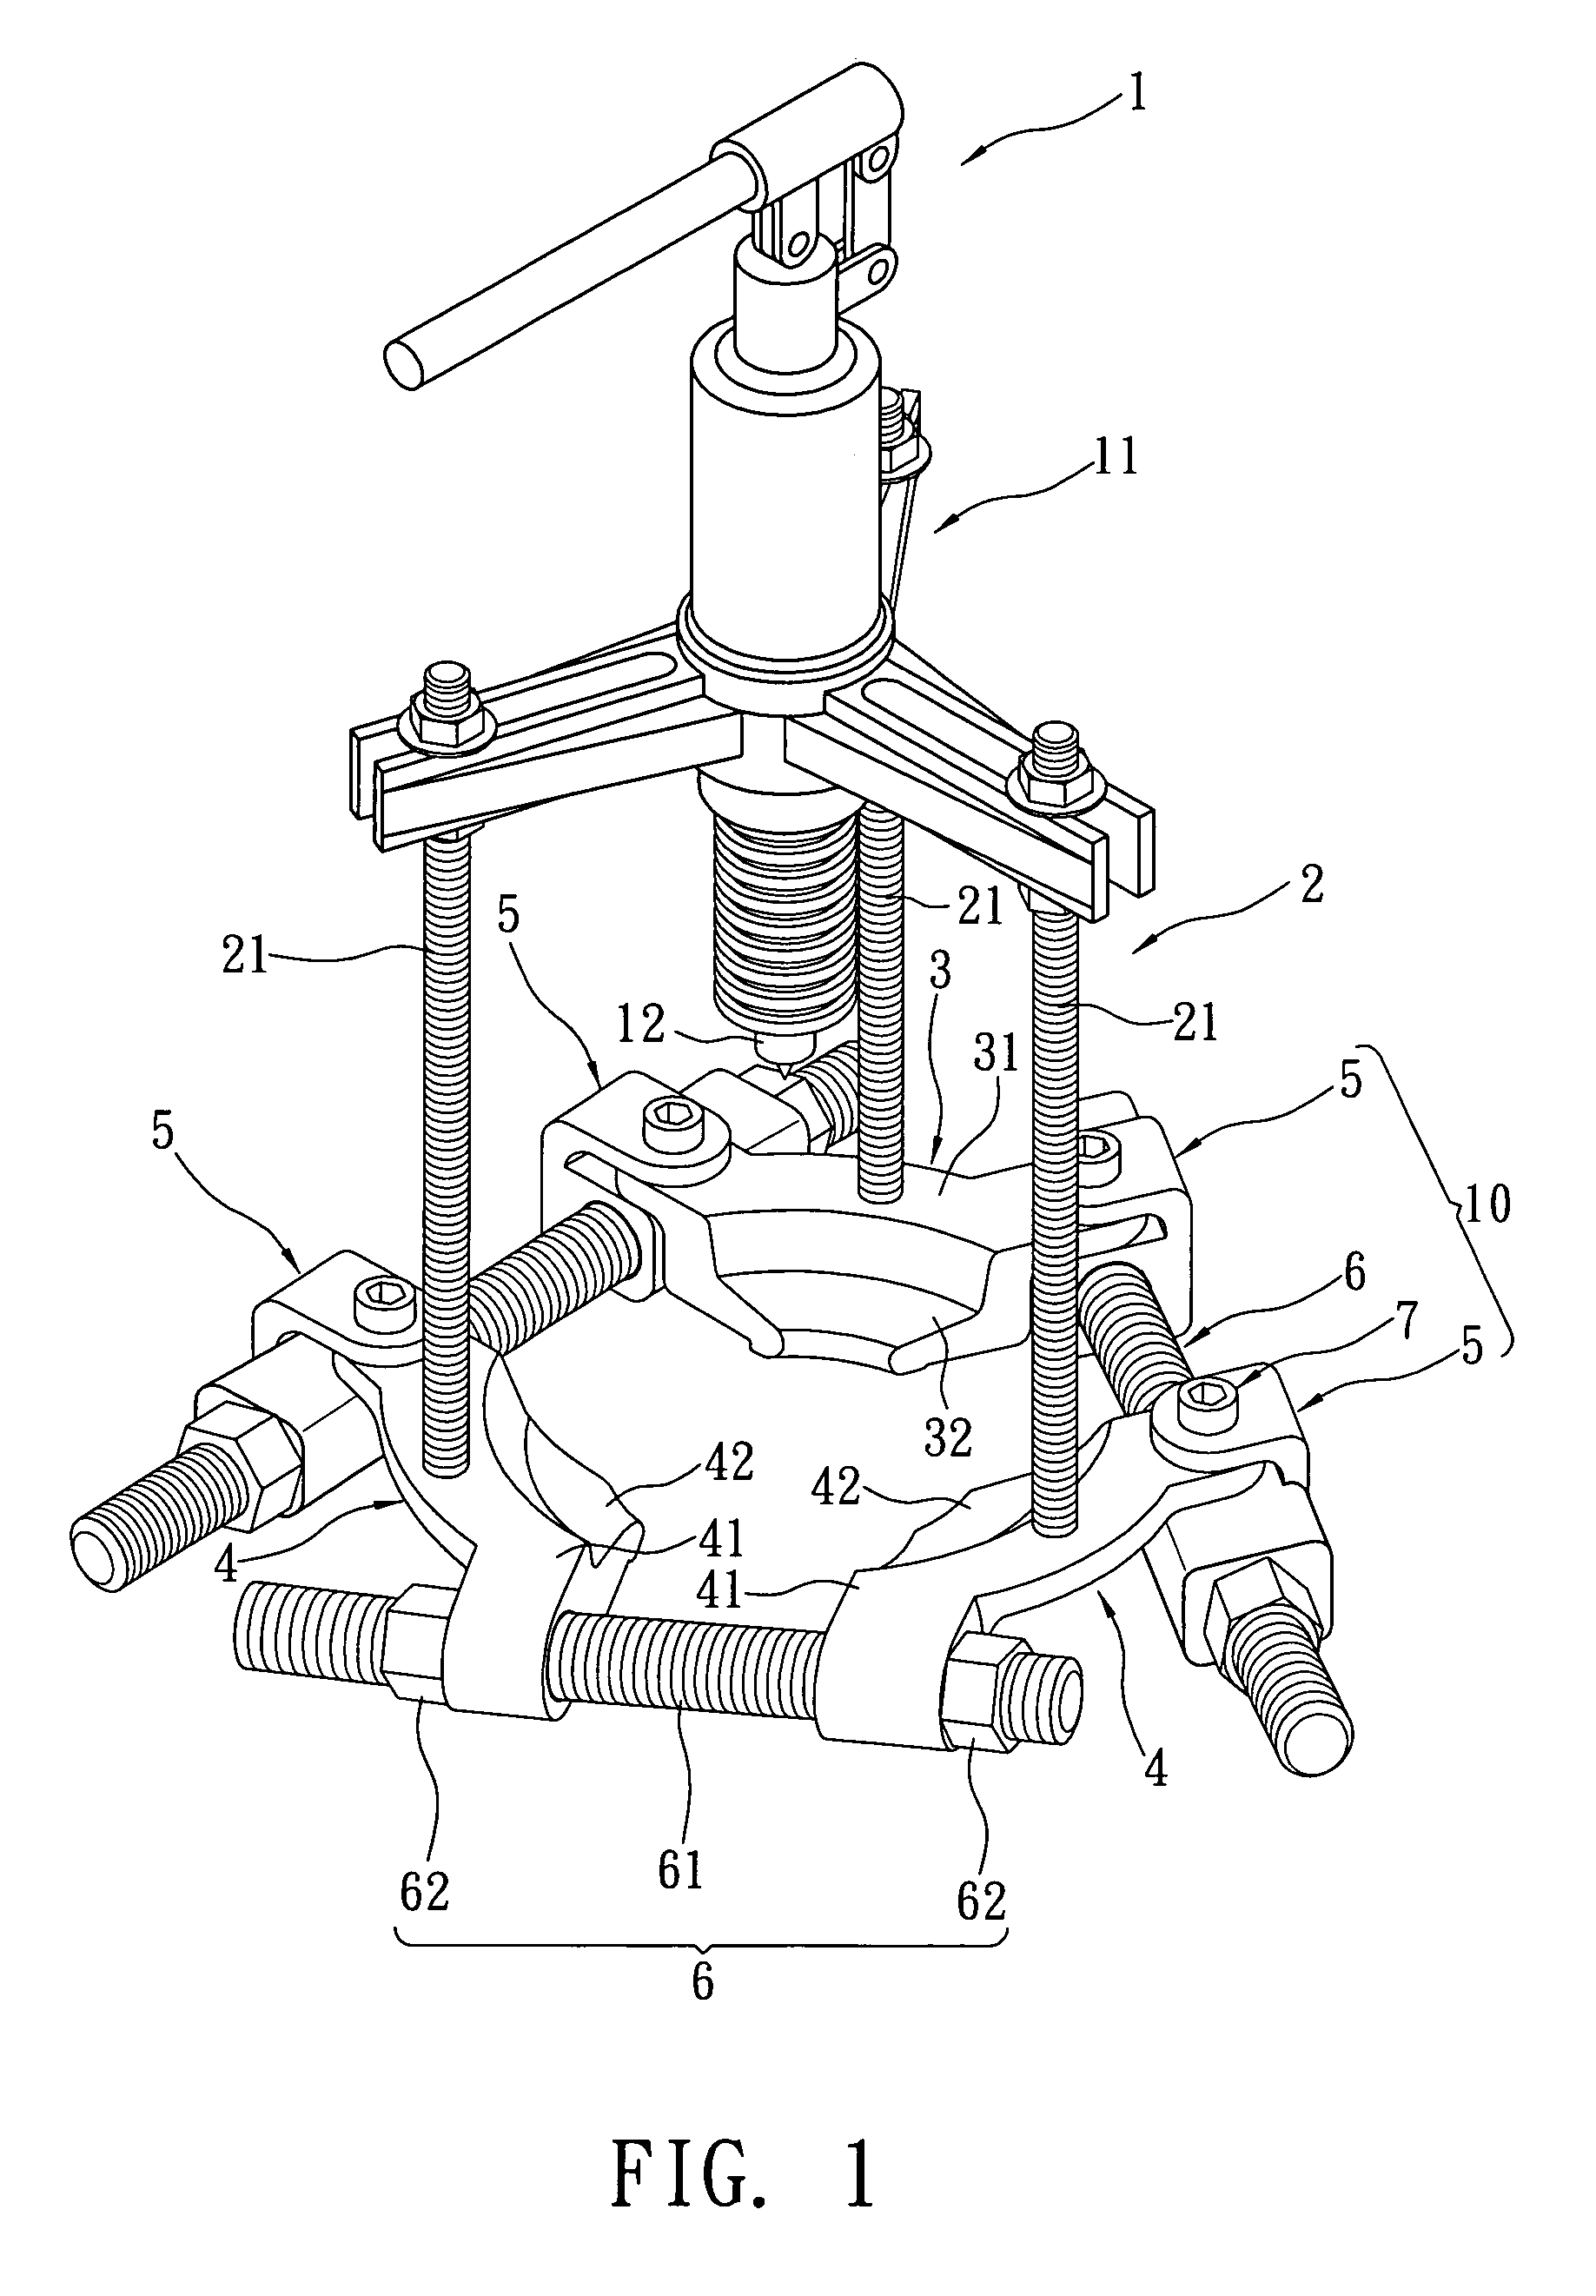 Clamping apparatus of a puller